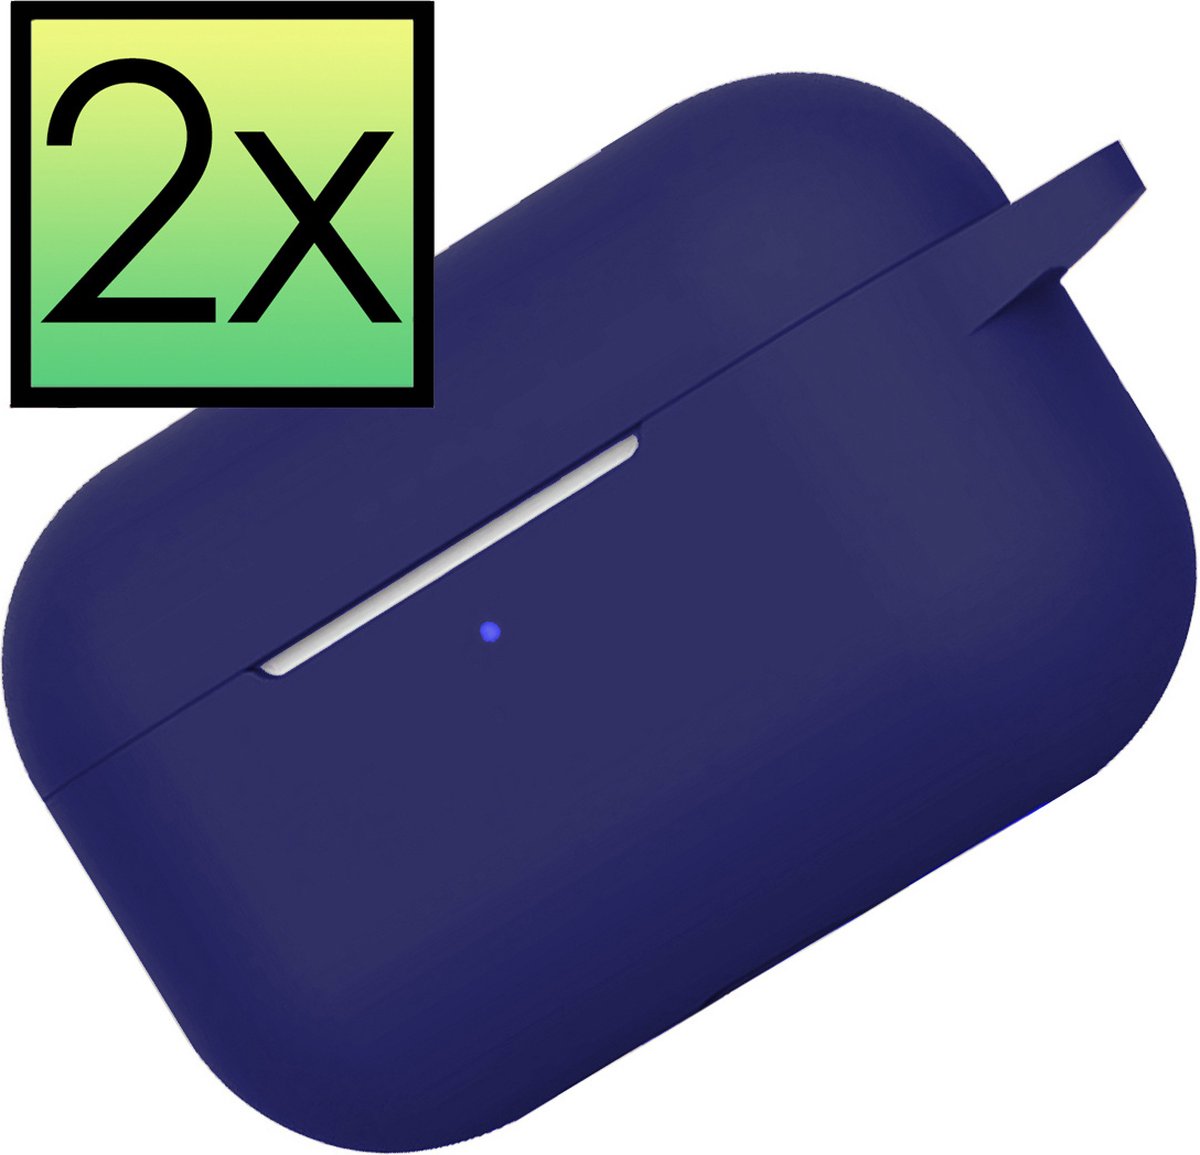 Hoes Geschikt voor AirPods Pro 2 Hoesje Cover Silicone Case Hoes - Donkerblauw - 2x